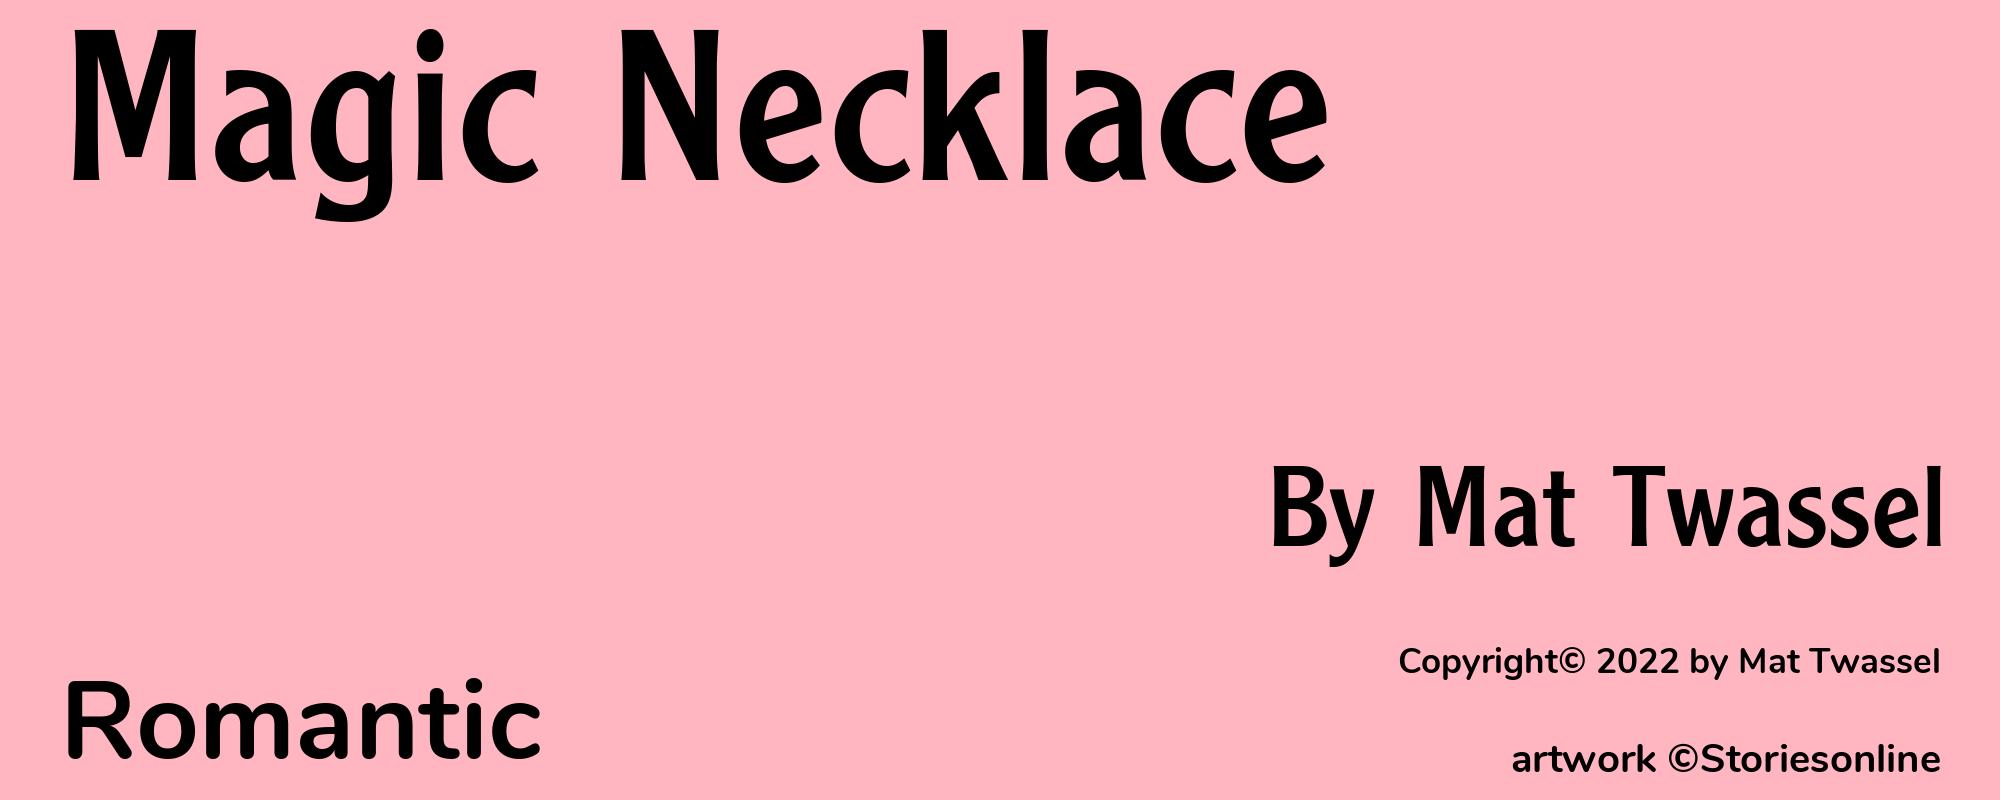 Magic Necklace - Cover